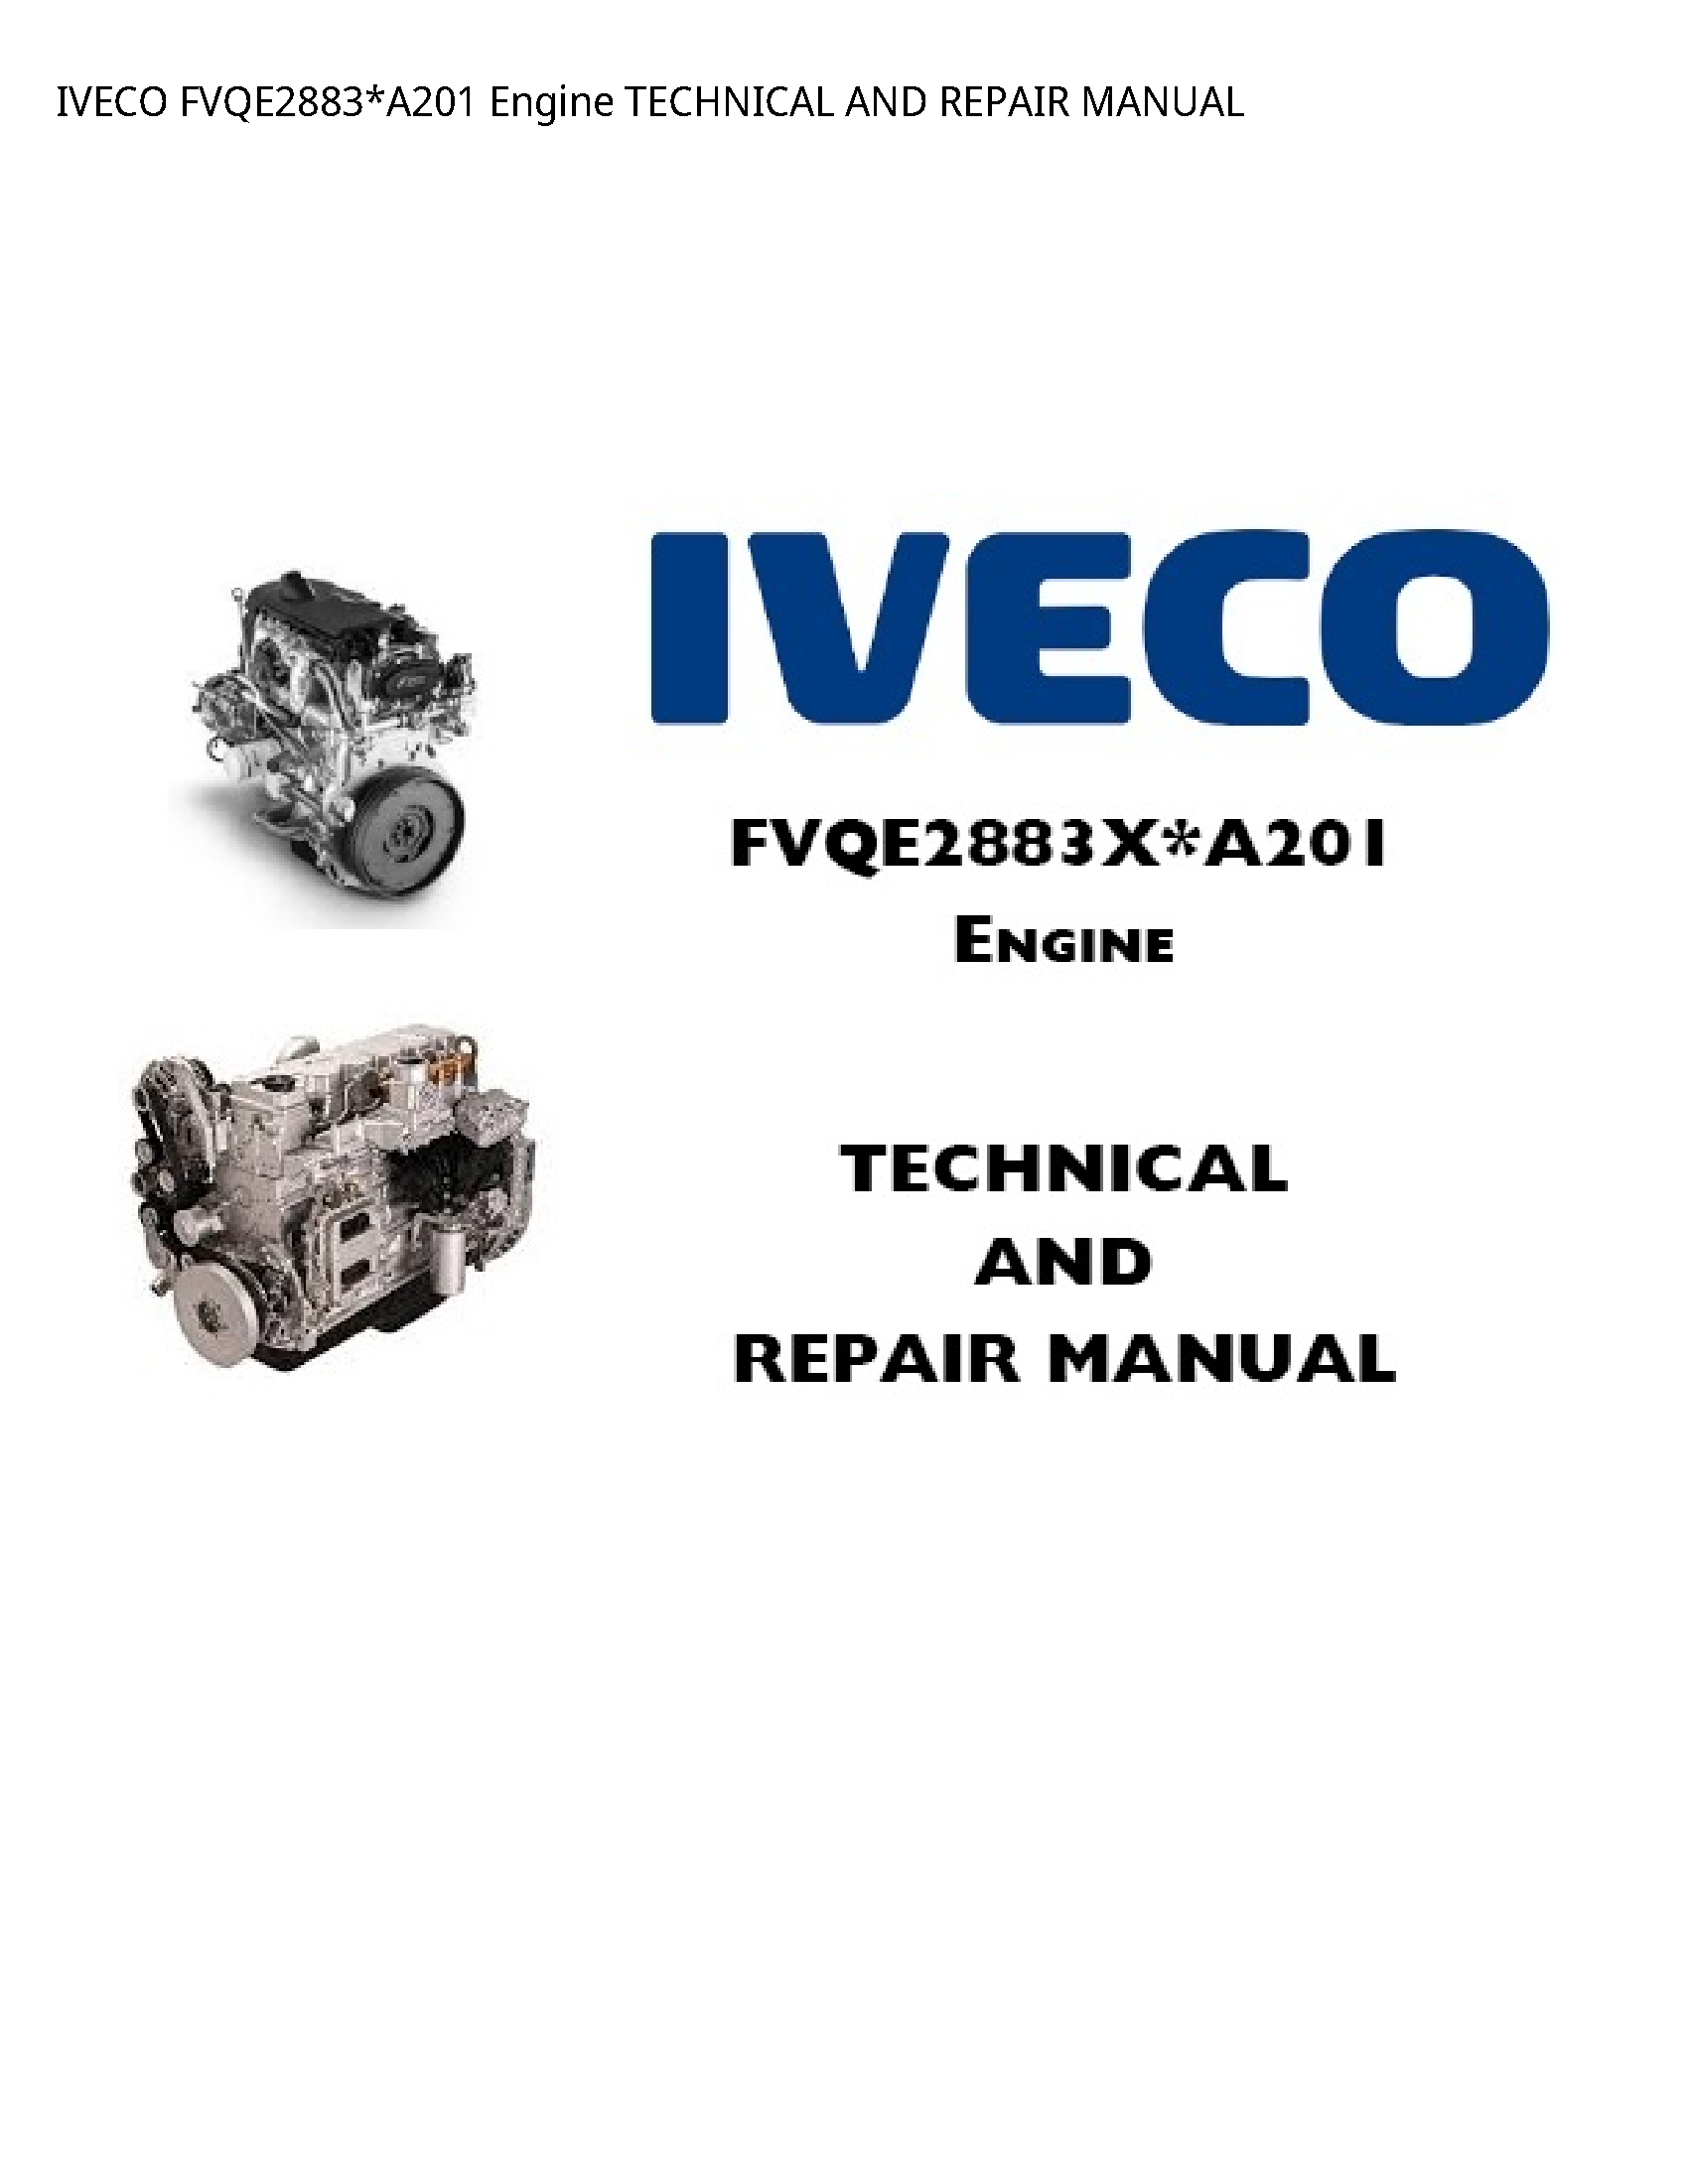 Iveco FVQE2883*A201 Engine TECHNICAL AND REPAIR manual